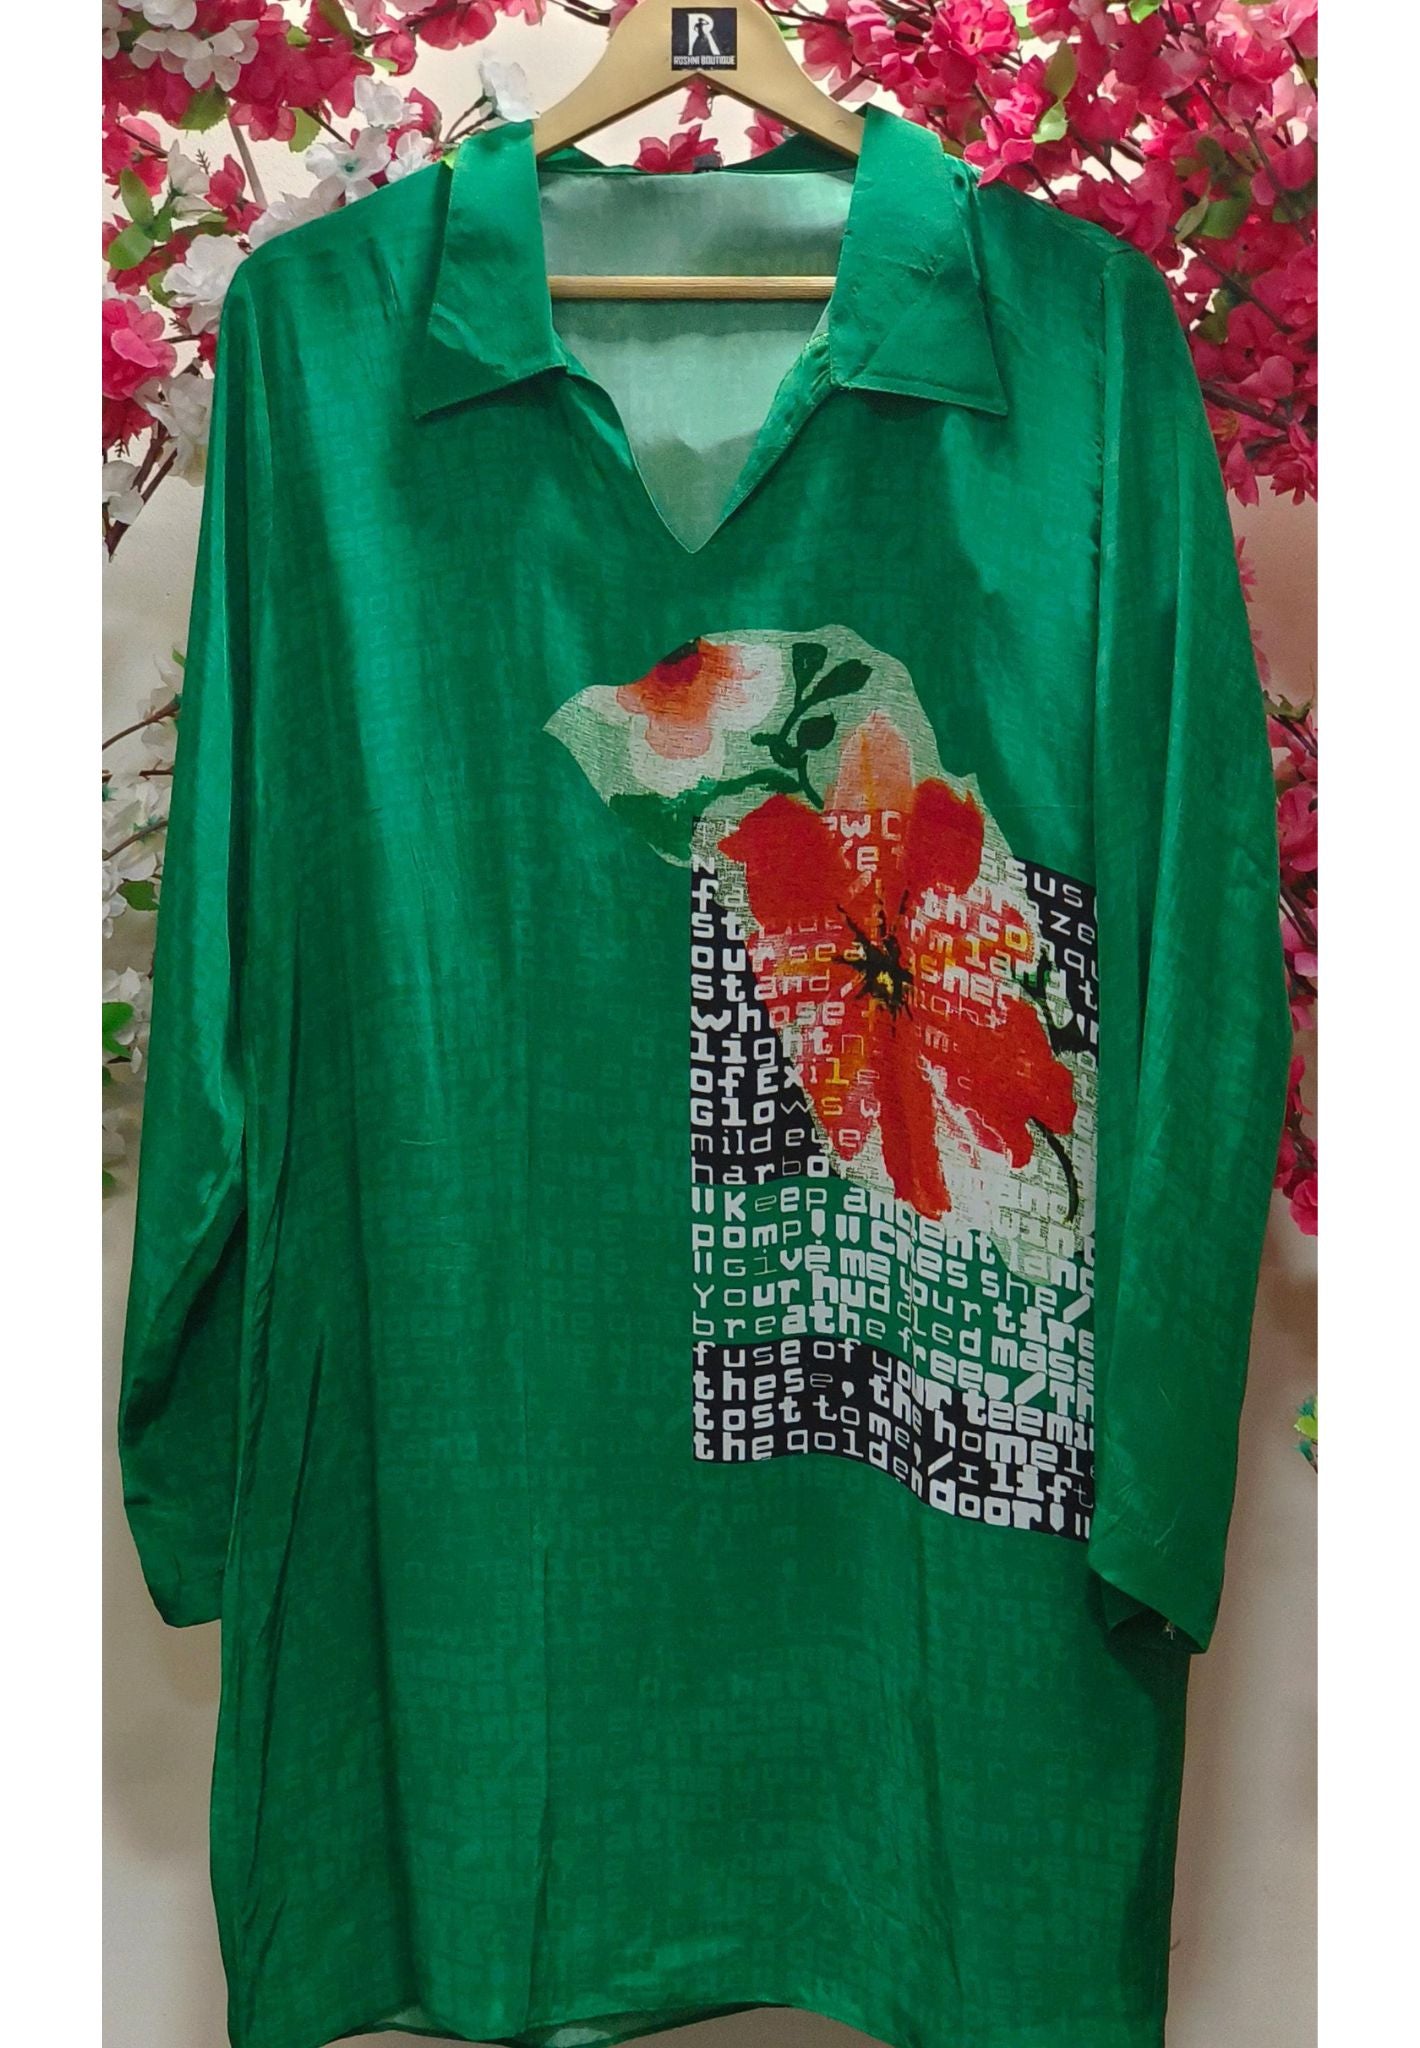 Pure Crape Solid Shade with Floral Print Shirt Top